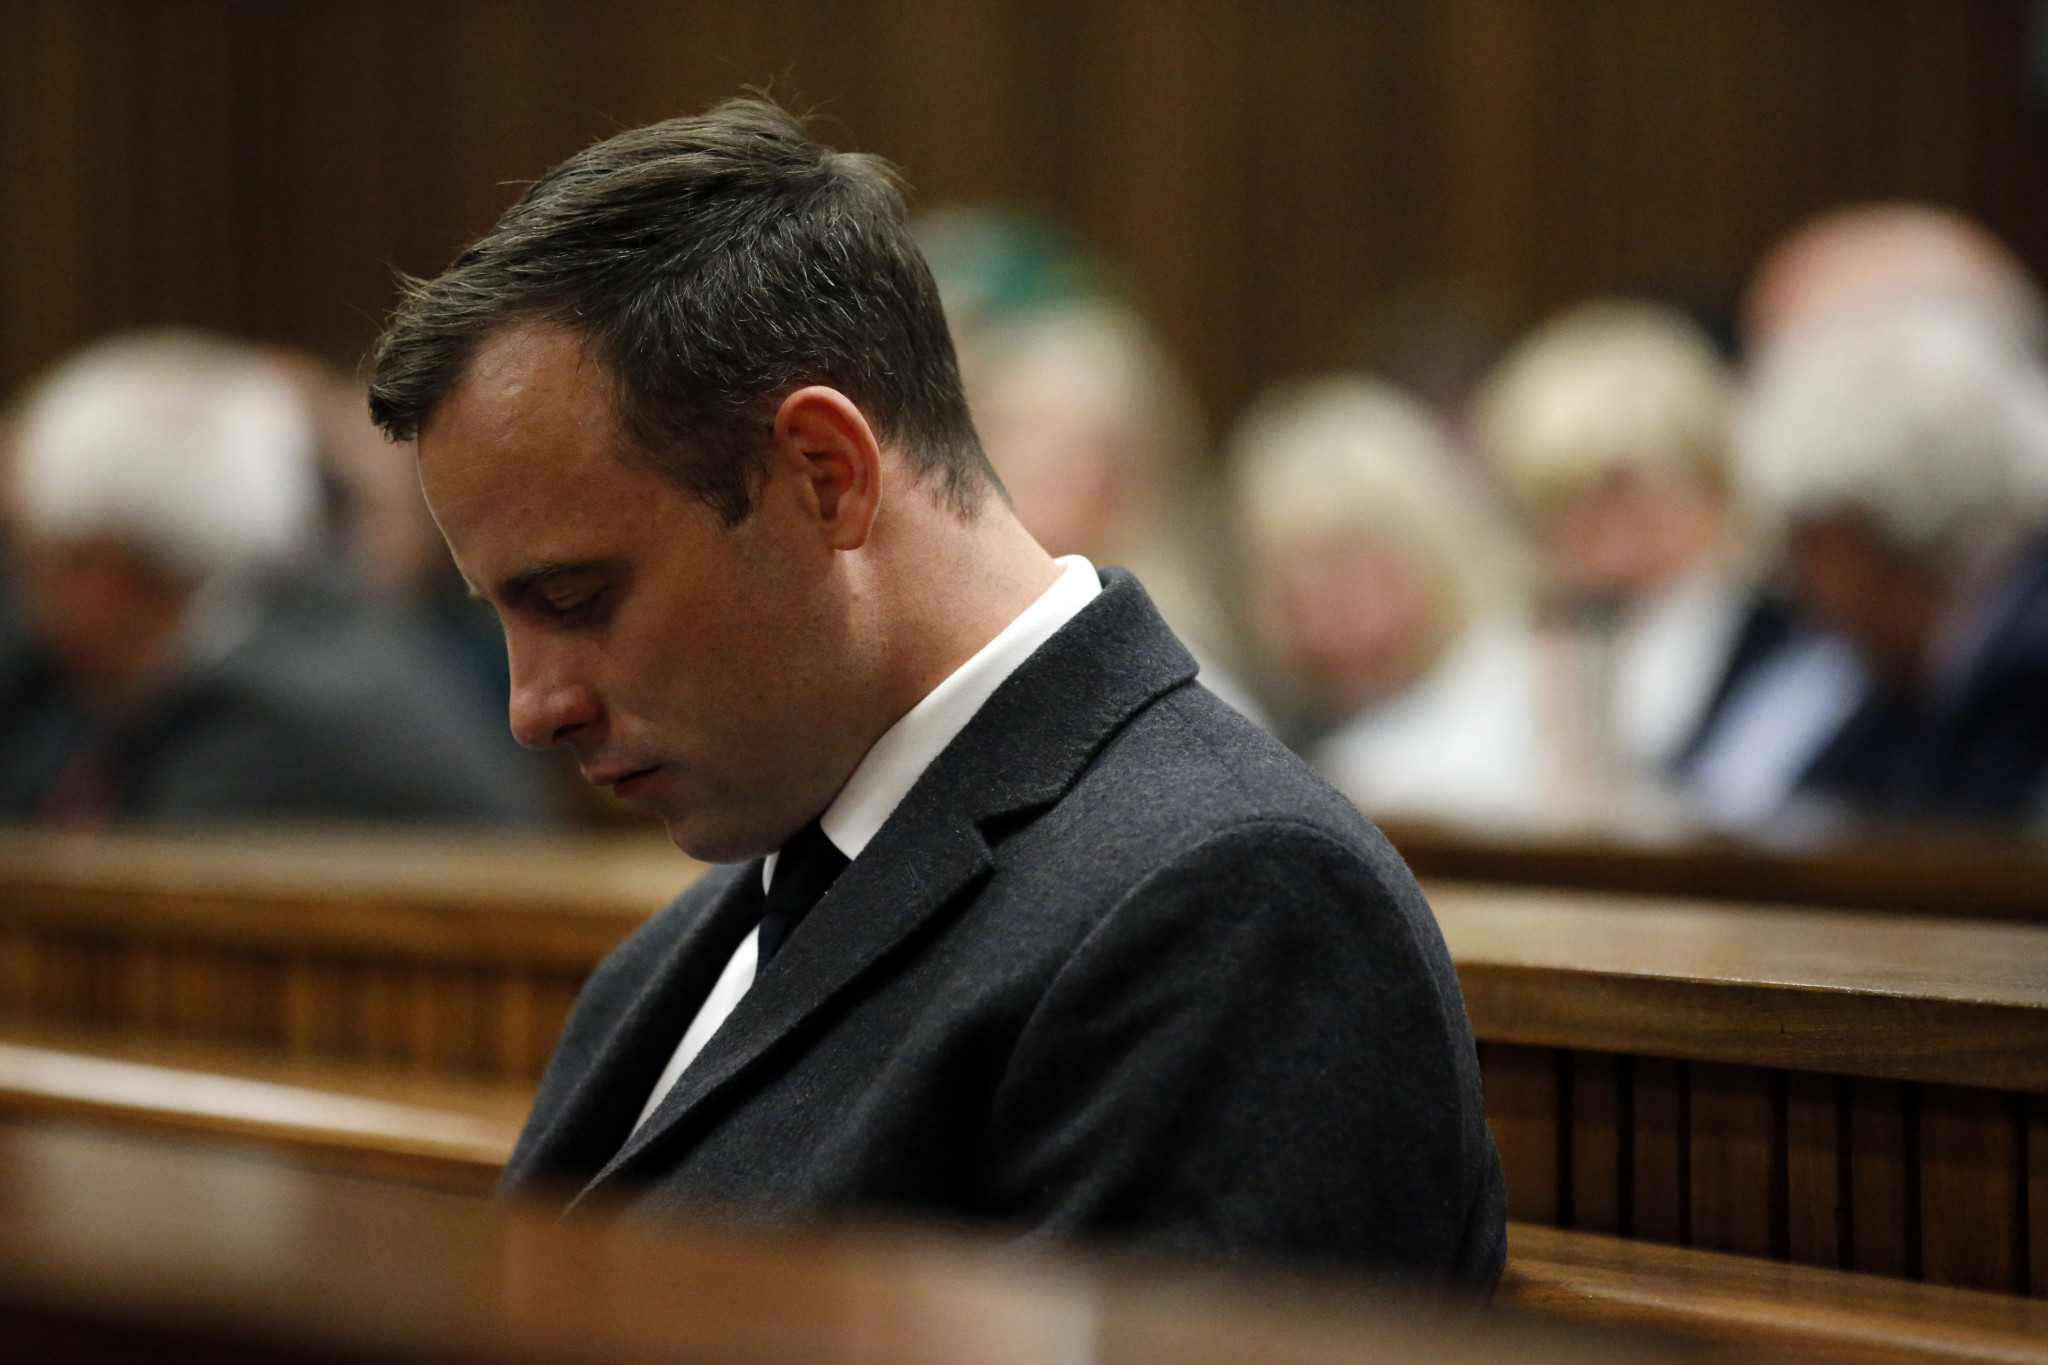 Six-time Paralympic Games gold medallist Oscar Pistorius could soon be free from prison after becoming eligible for parole ©Getty Images